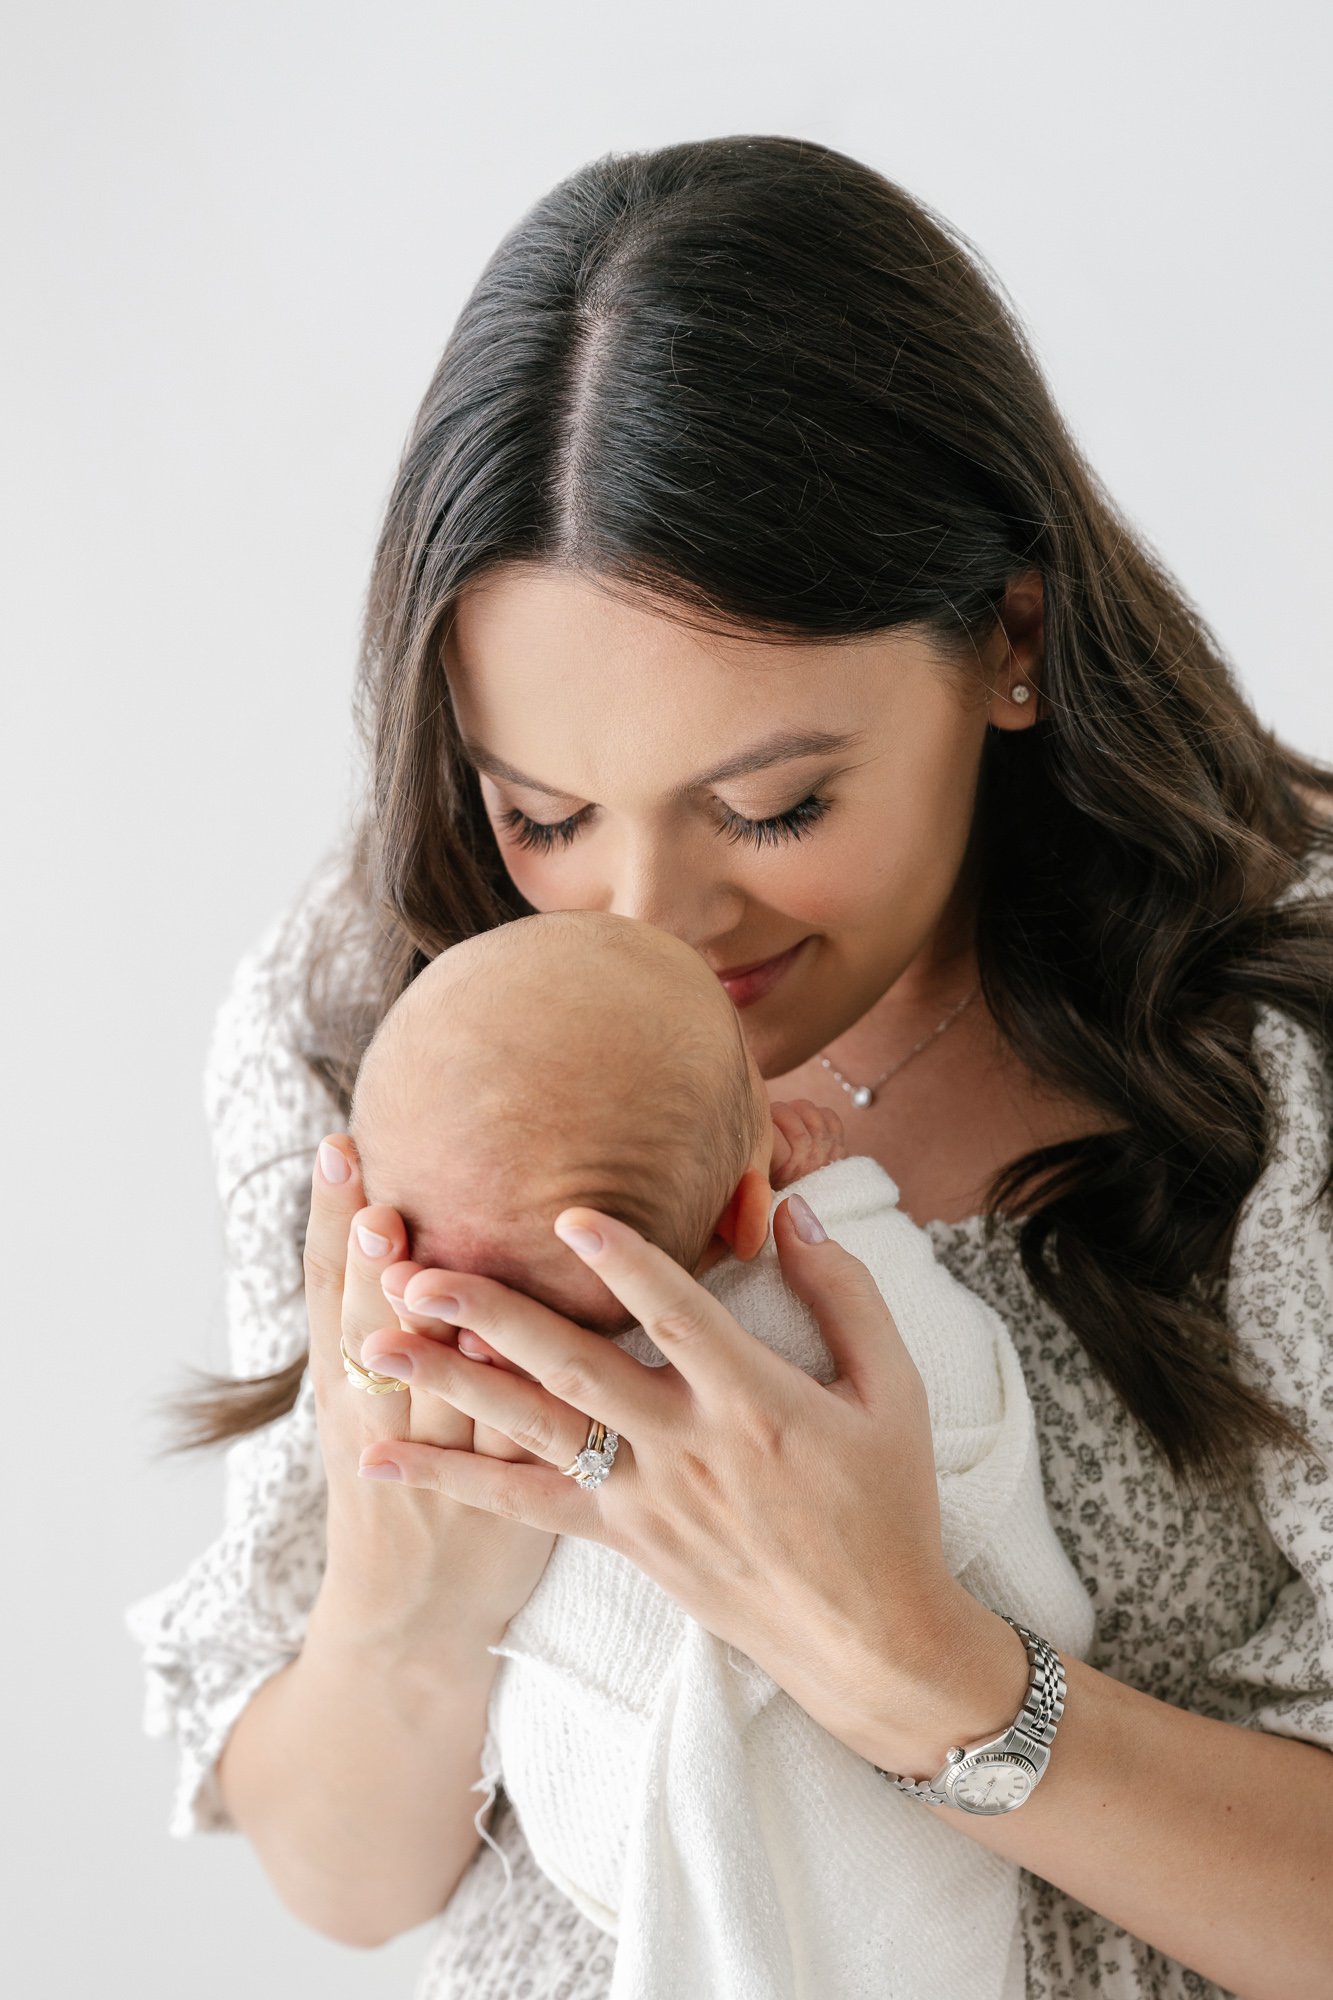  Tender moment captured by Nicole Hawkins Photography, a New Jersey based photographer: A mother leaning in close to her precious newborn, radiating love and affection. #NicoleHawkinsphotography #newbornportraits #NewJerseynewbornphotographer #NewJer